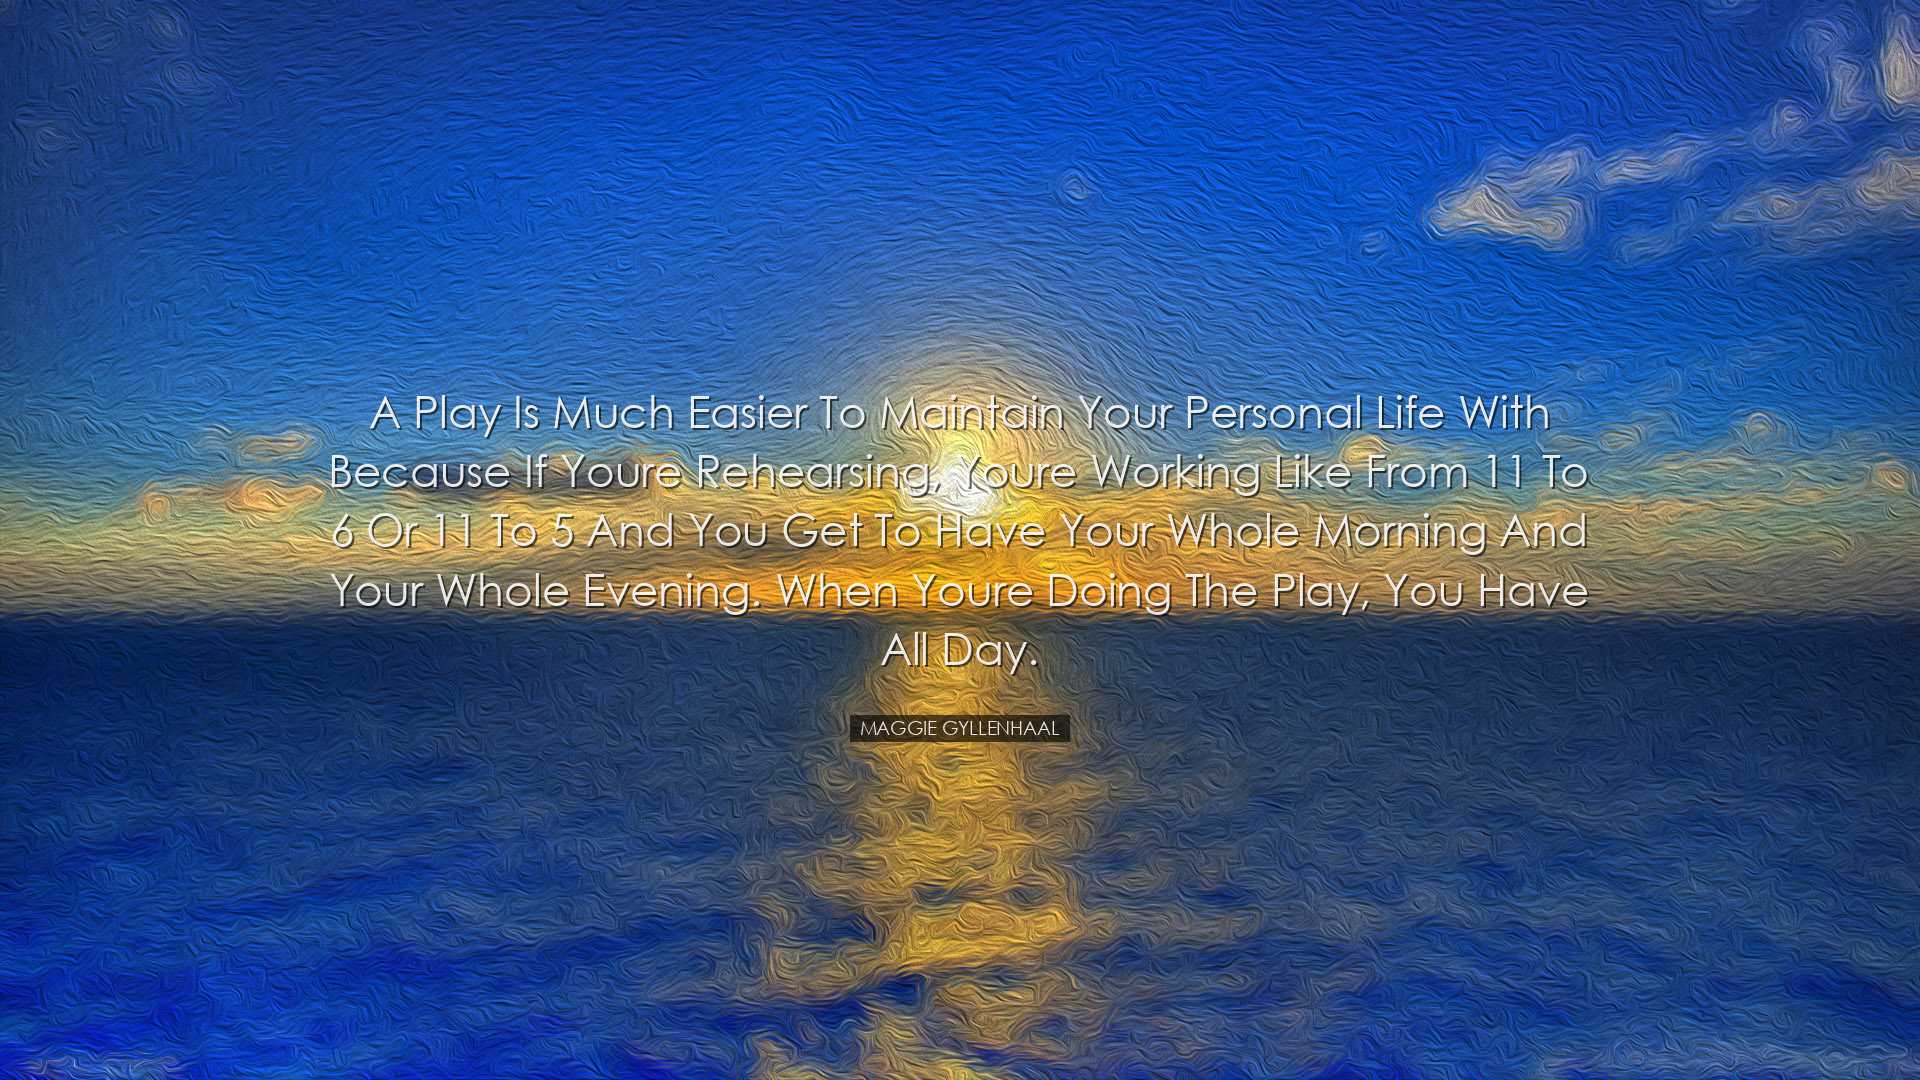 A play is much easier to maintain your personal life with because